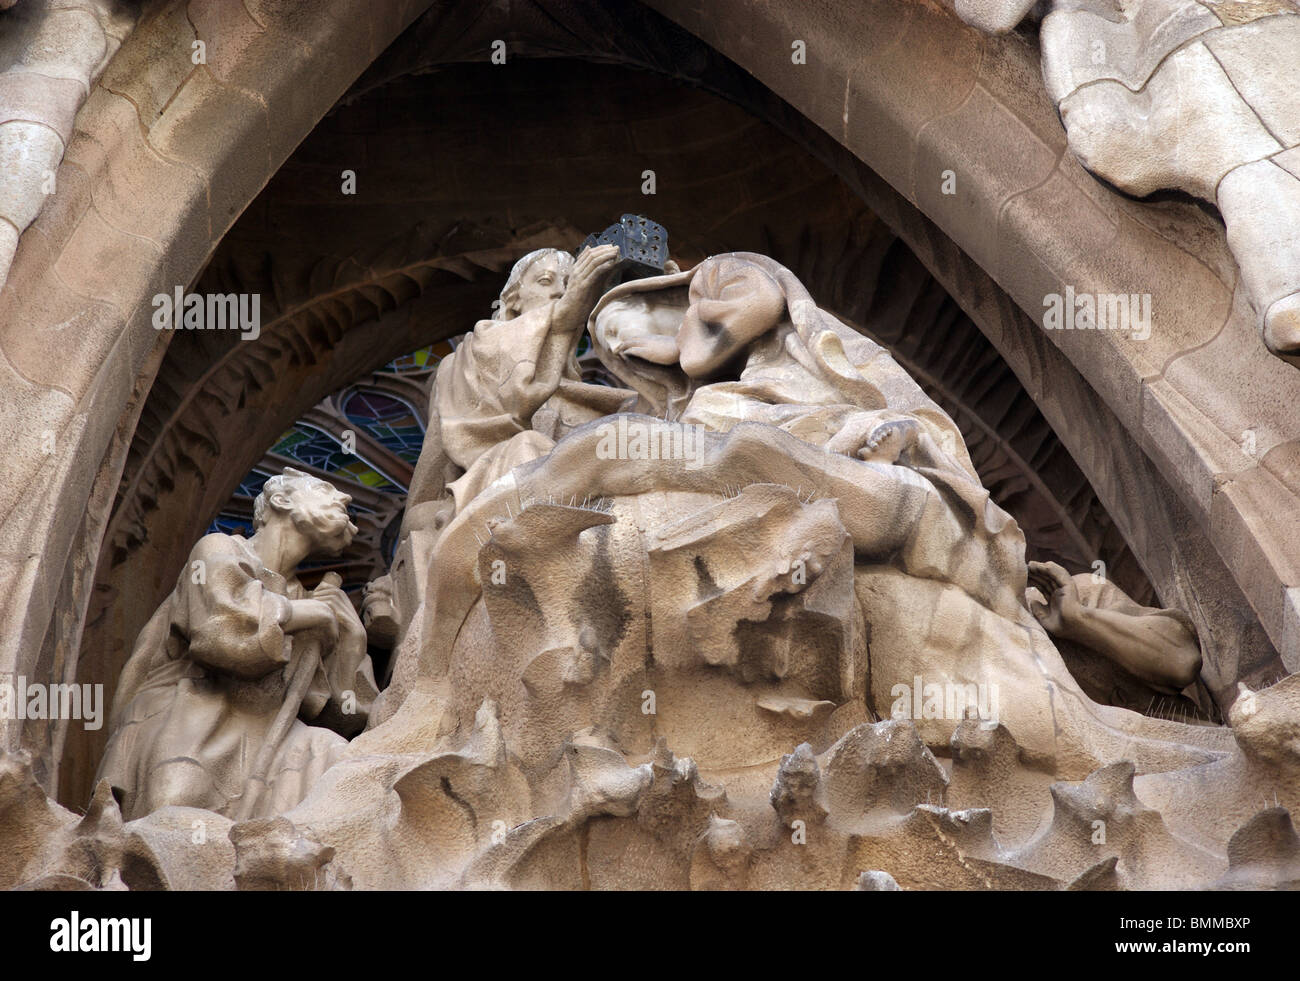 EXTERIOR OF SAGRADA FAMILIA CATHEDRAL UNFINISHED GAUDI  CHURCH IN BARCELONA STONE RELIGIOUS STATUES SPAIN EUROPE Stock Photo